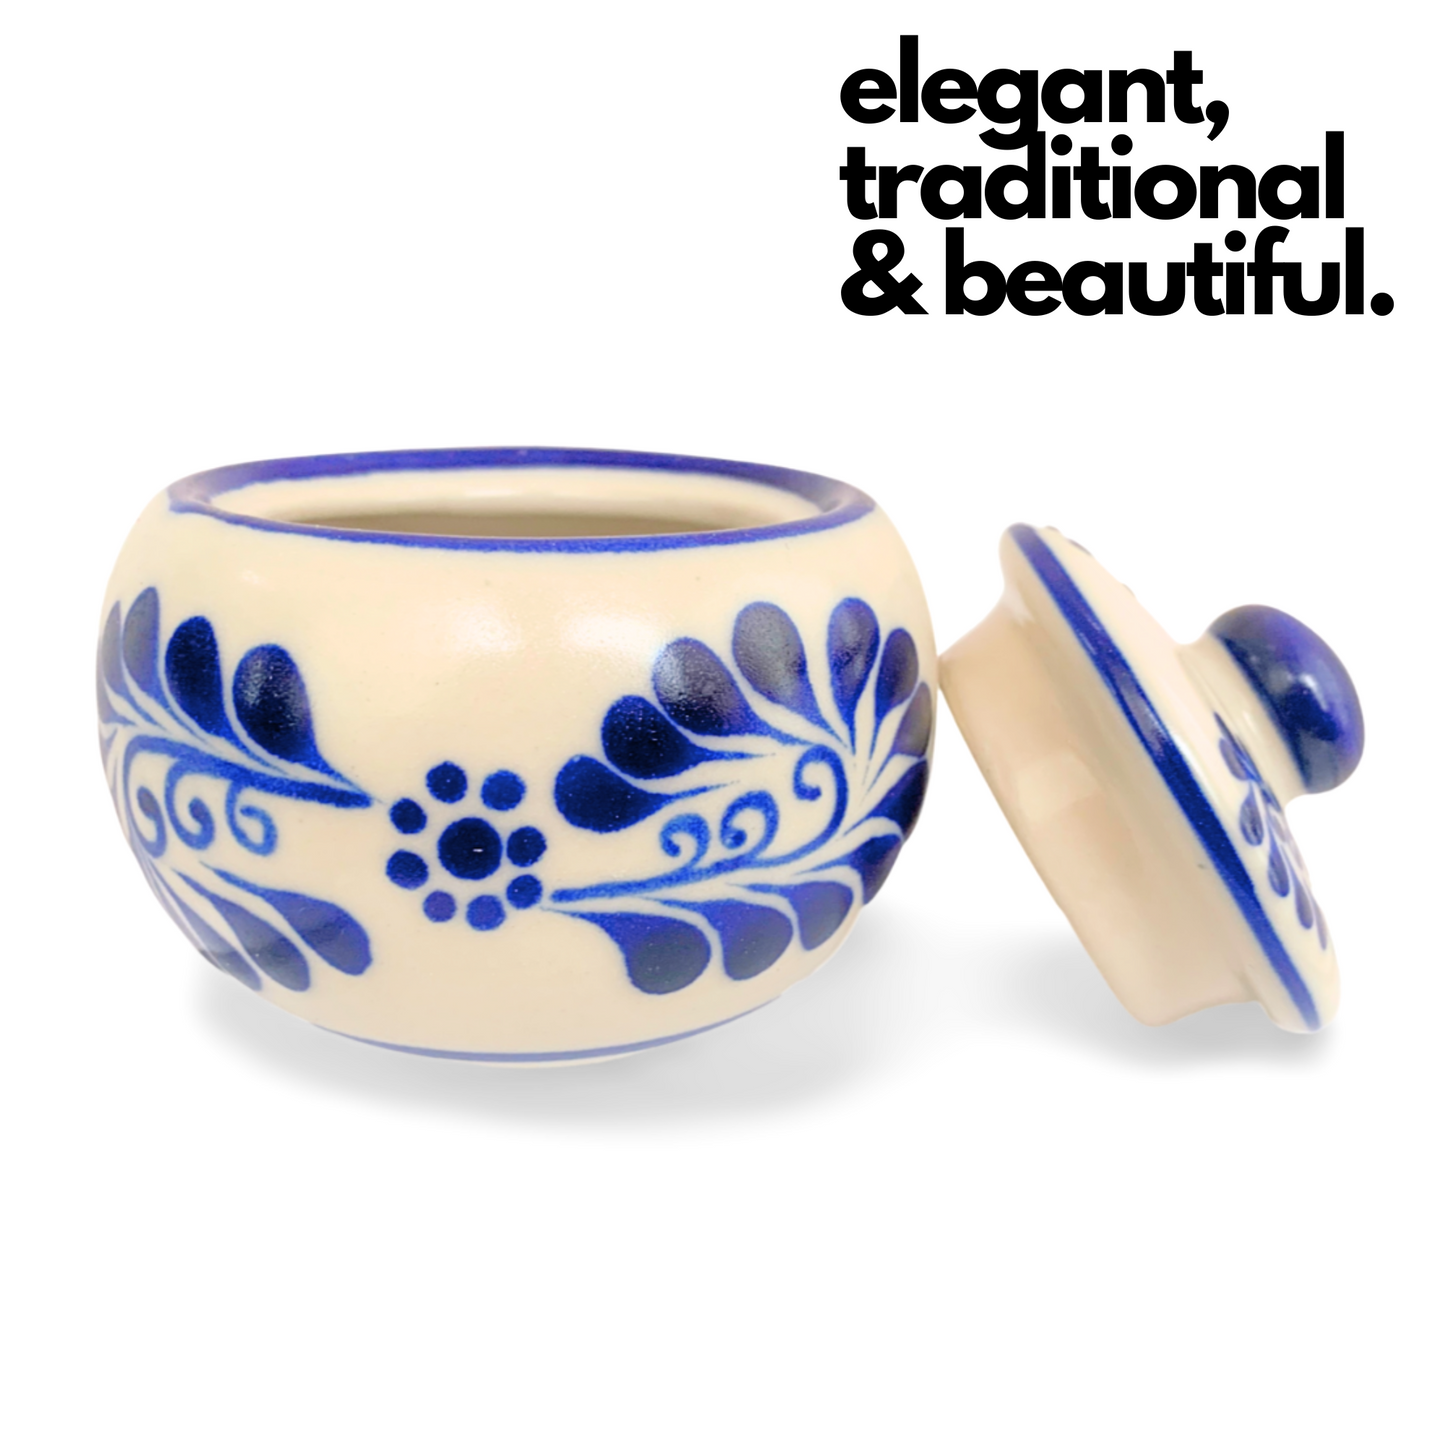 Hand-painted Talavera ceramic sugar bowl, offering a touch of authentic Mexican craftsmanship and versatile use for sugar, tea, or spices.